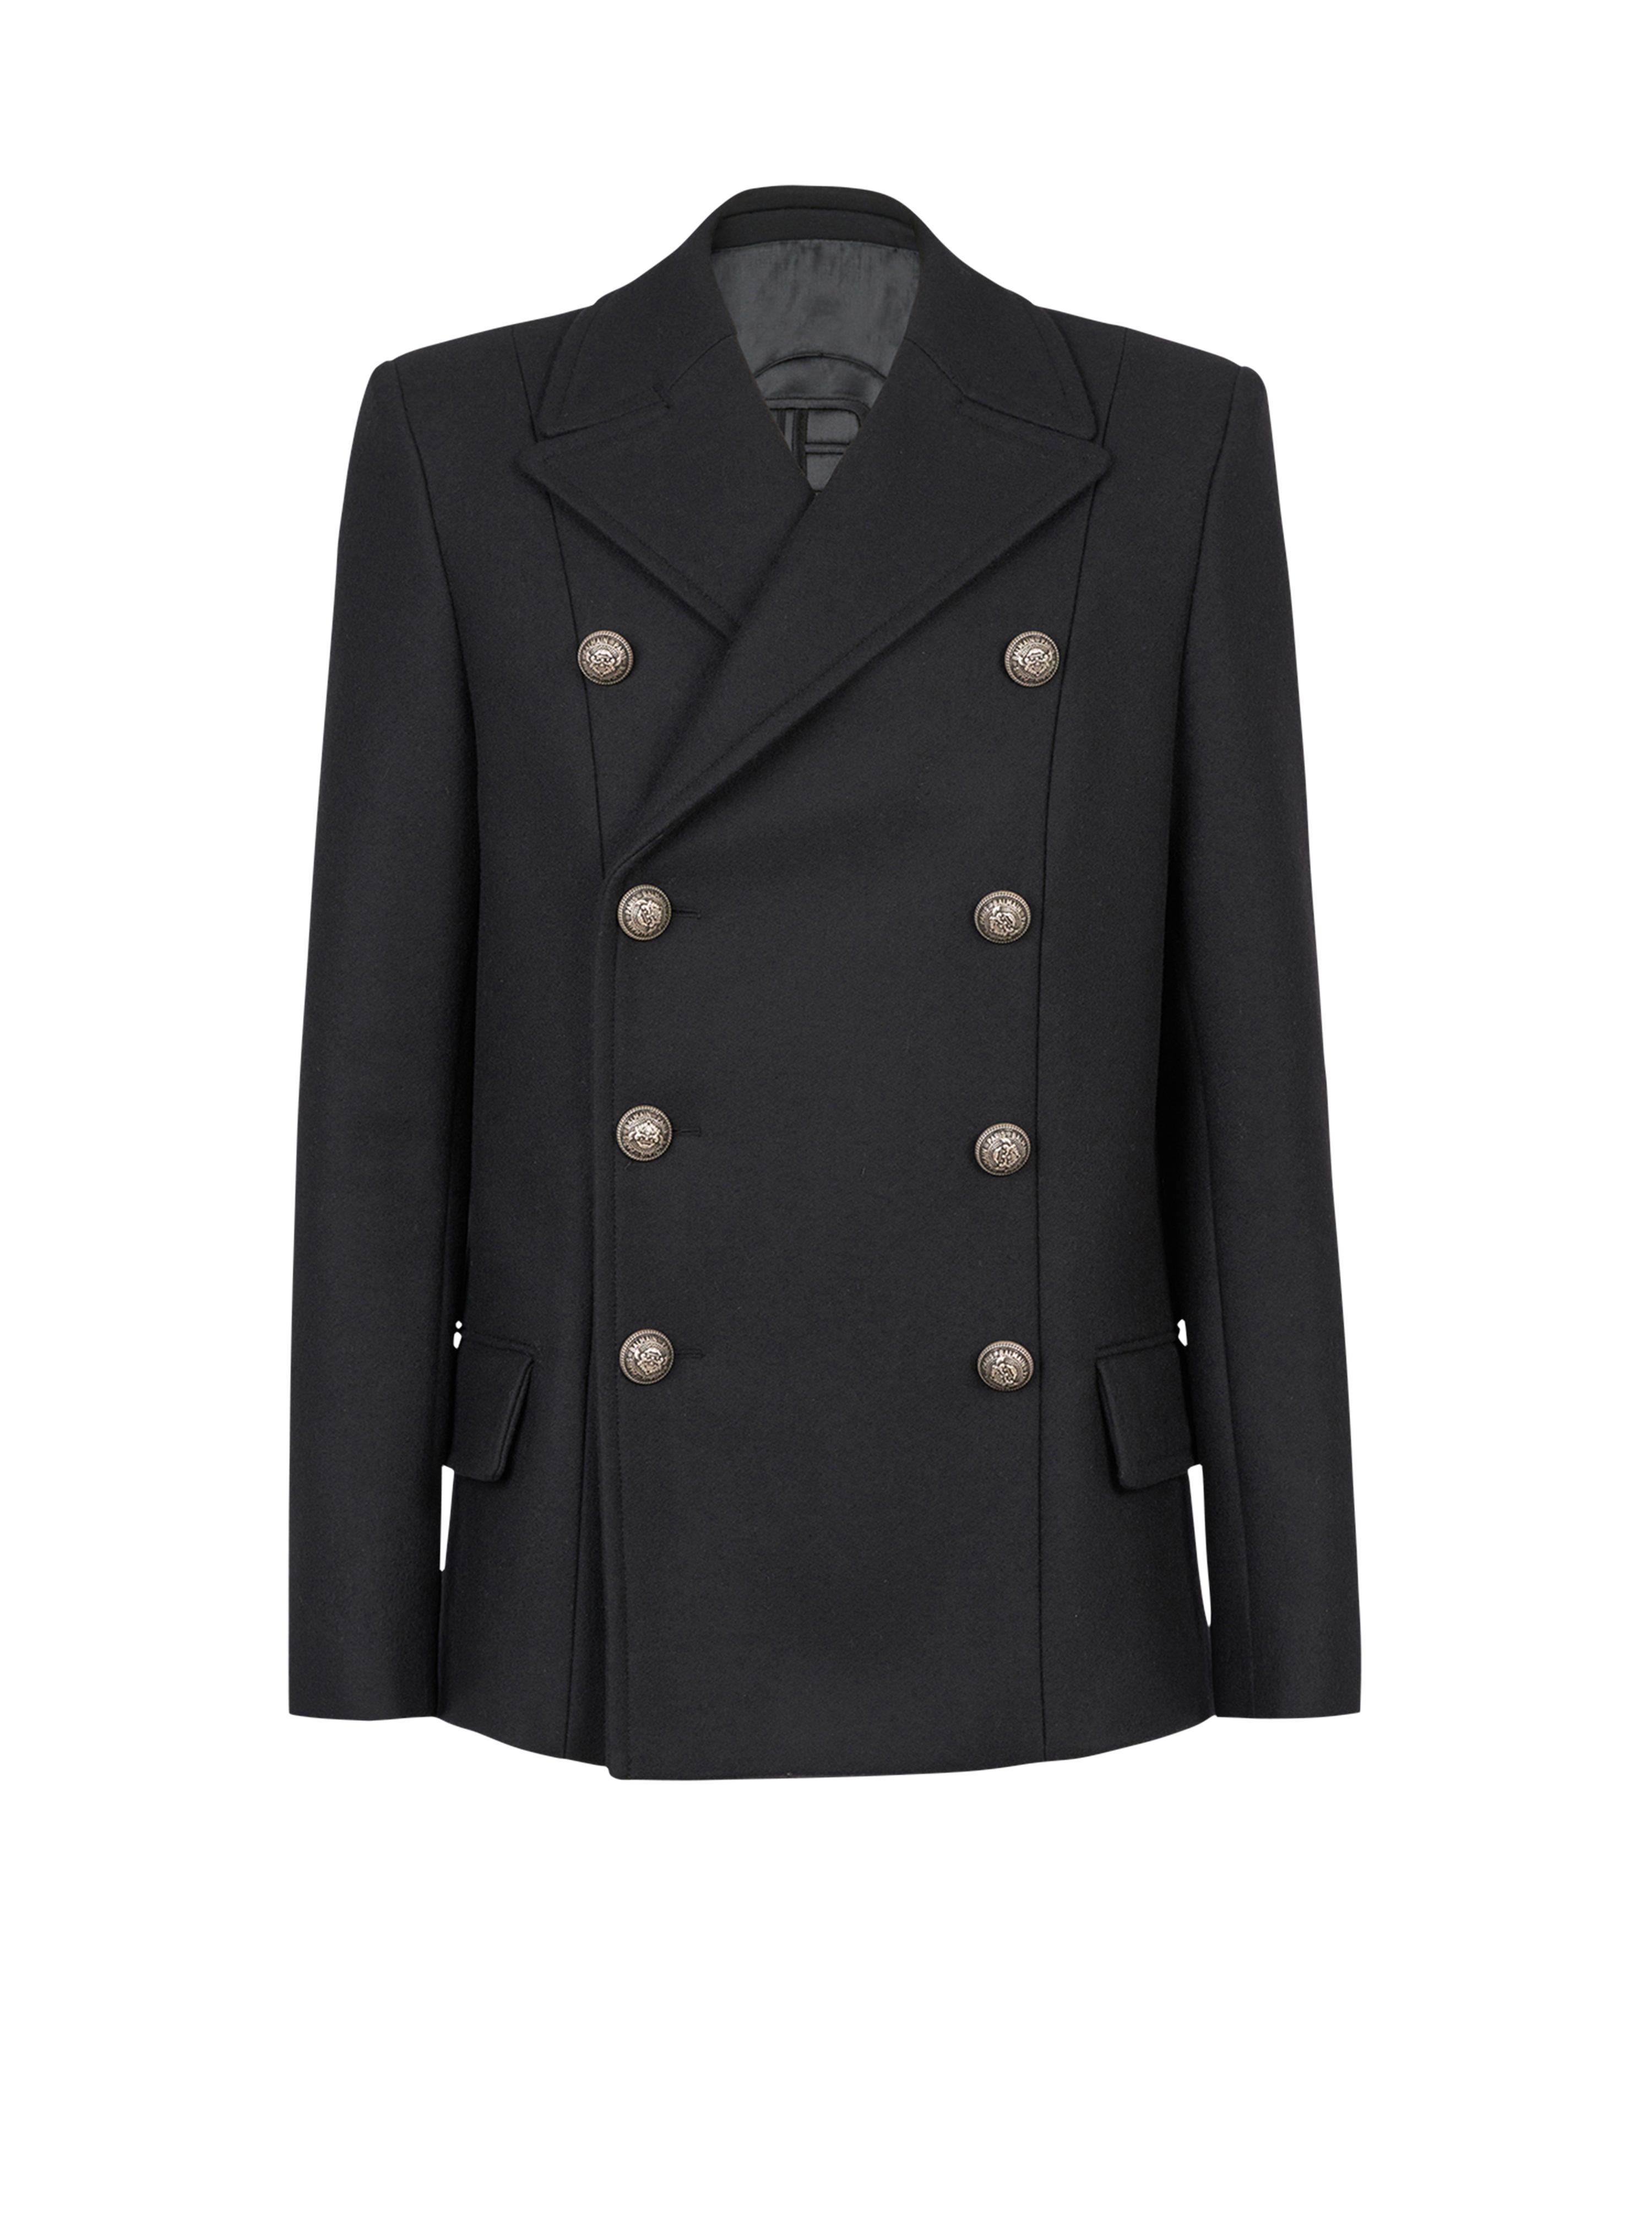 Wool pea coat with double-breasted silver-tone buttoned fastening, black